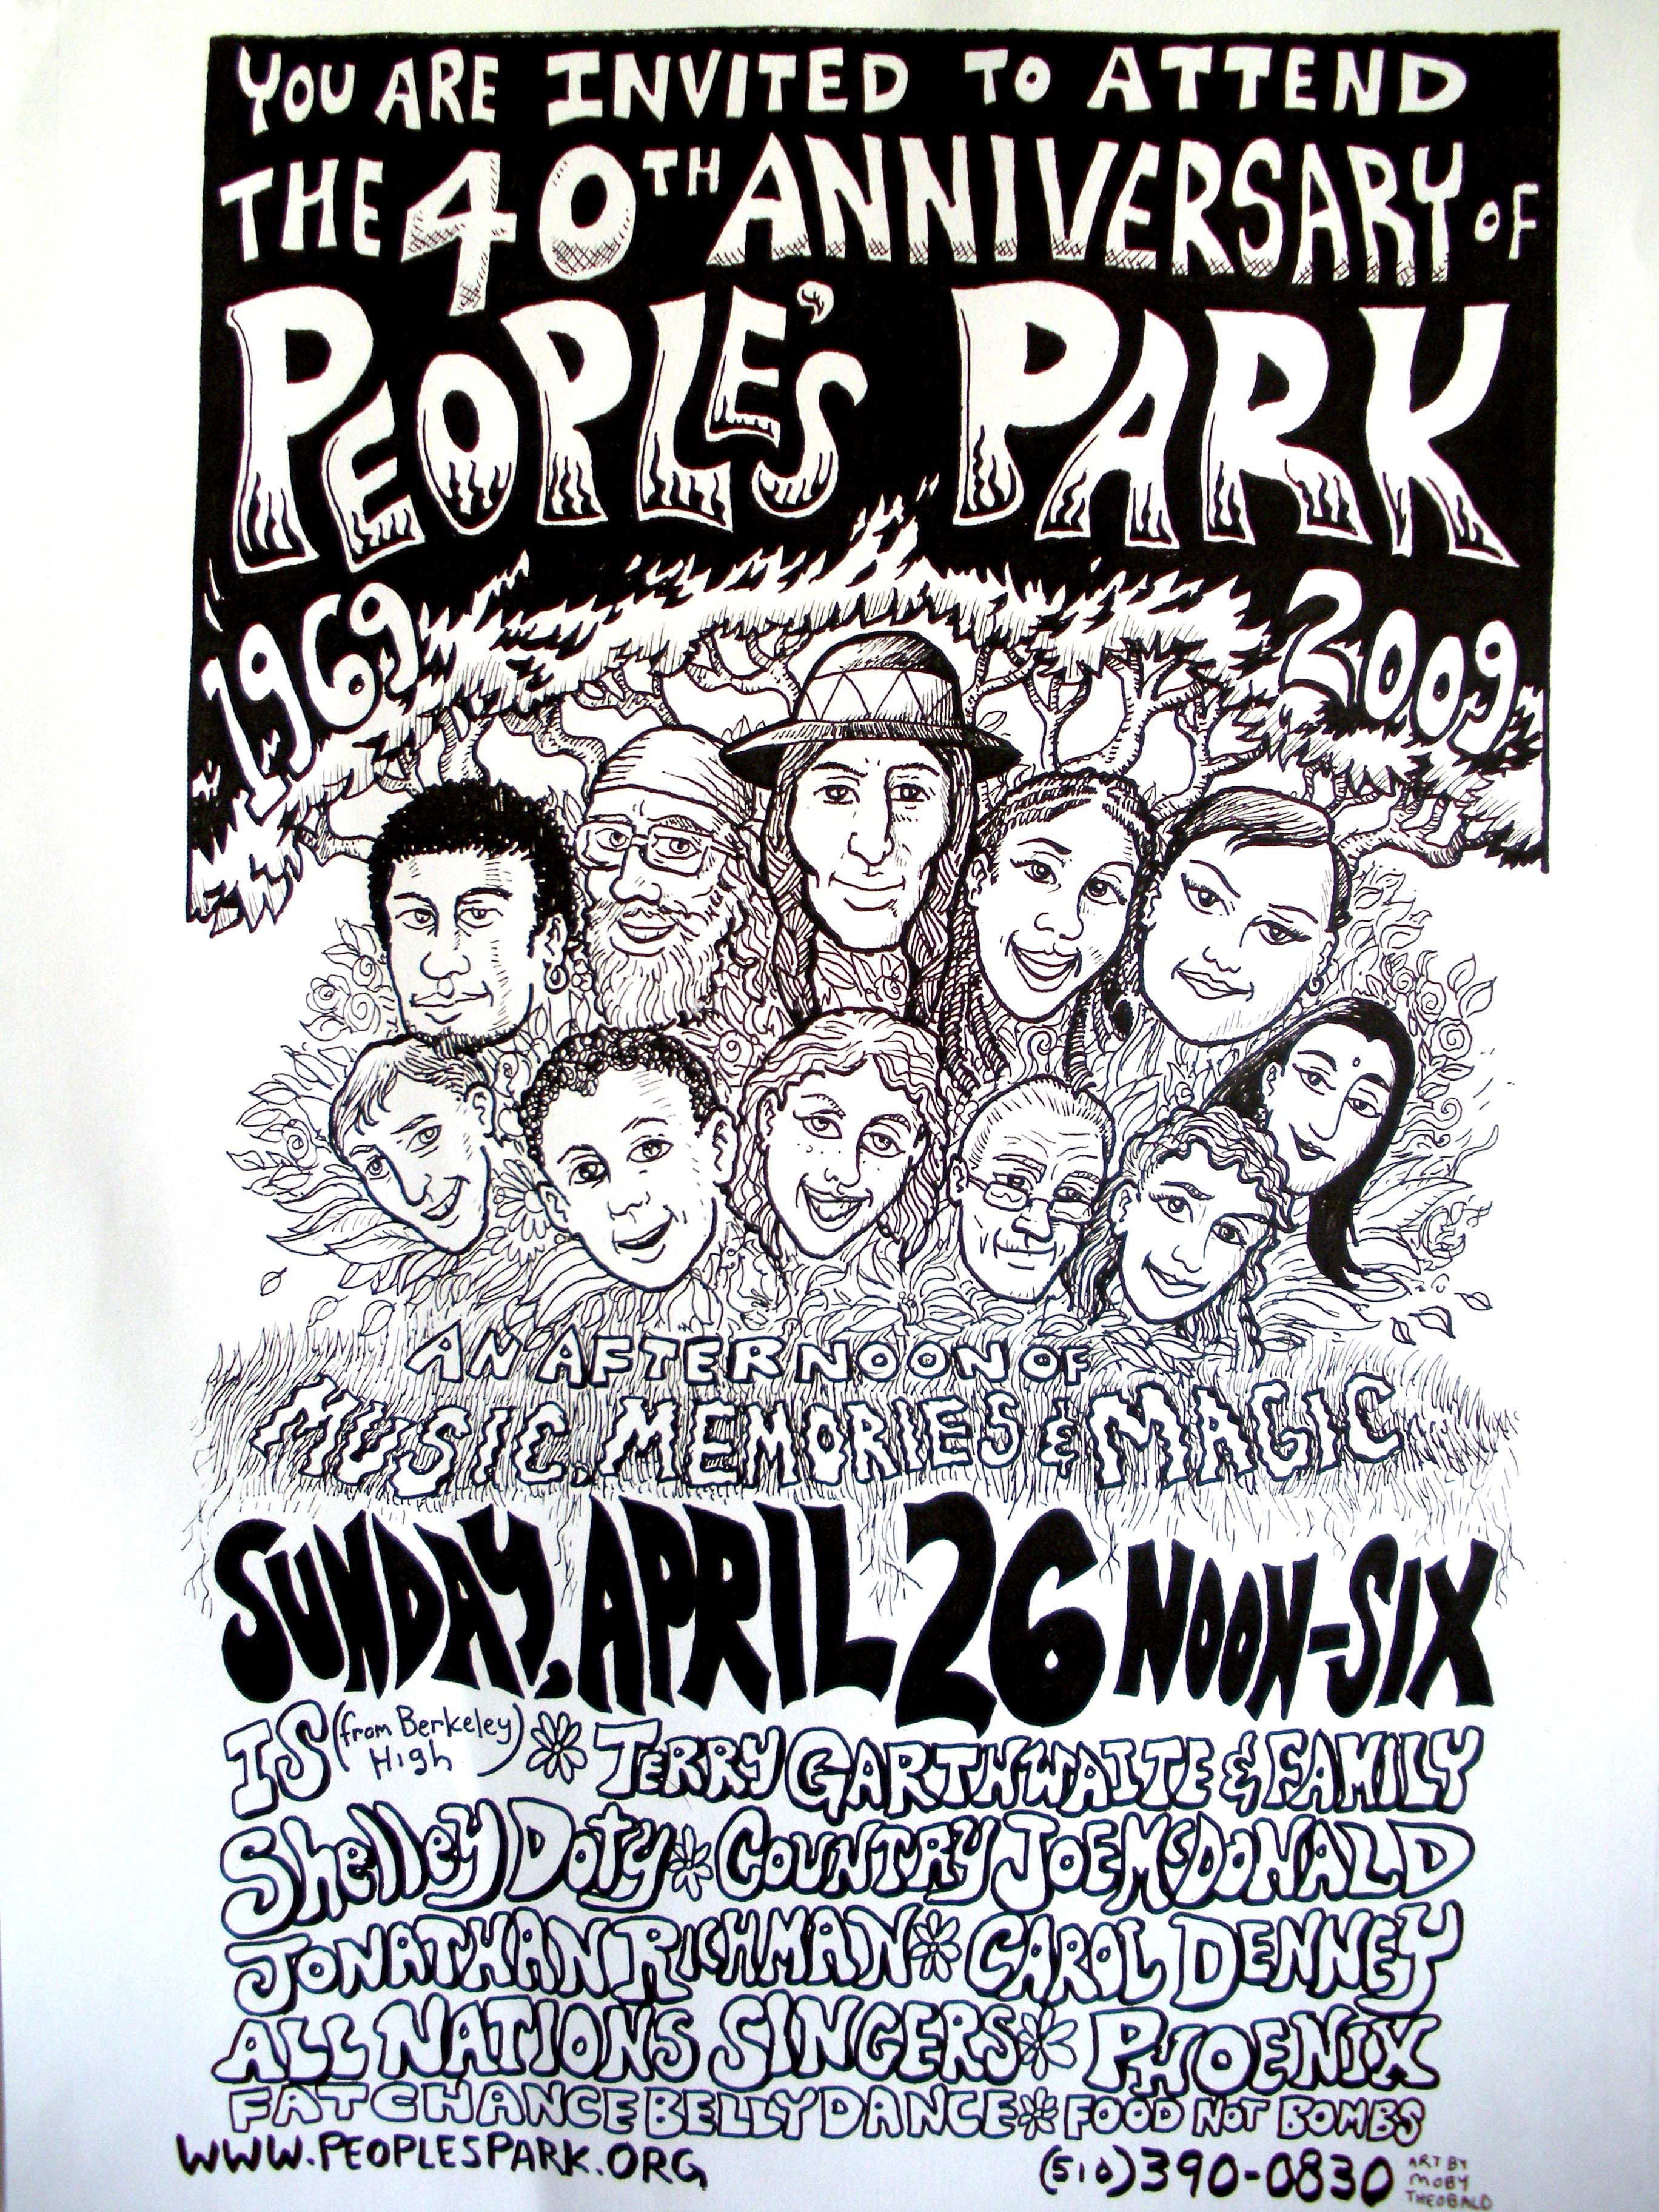 40th Anniversary of People's Park Concert poster for Sunday, April 25th, 2009.